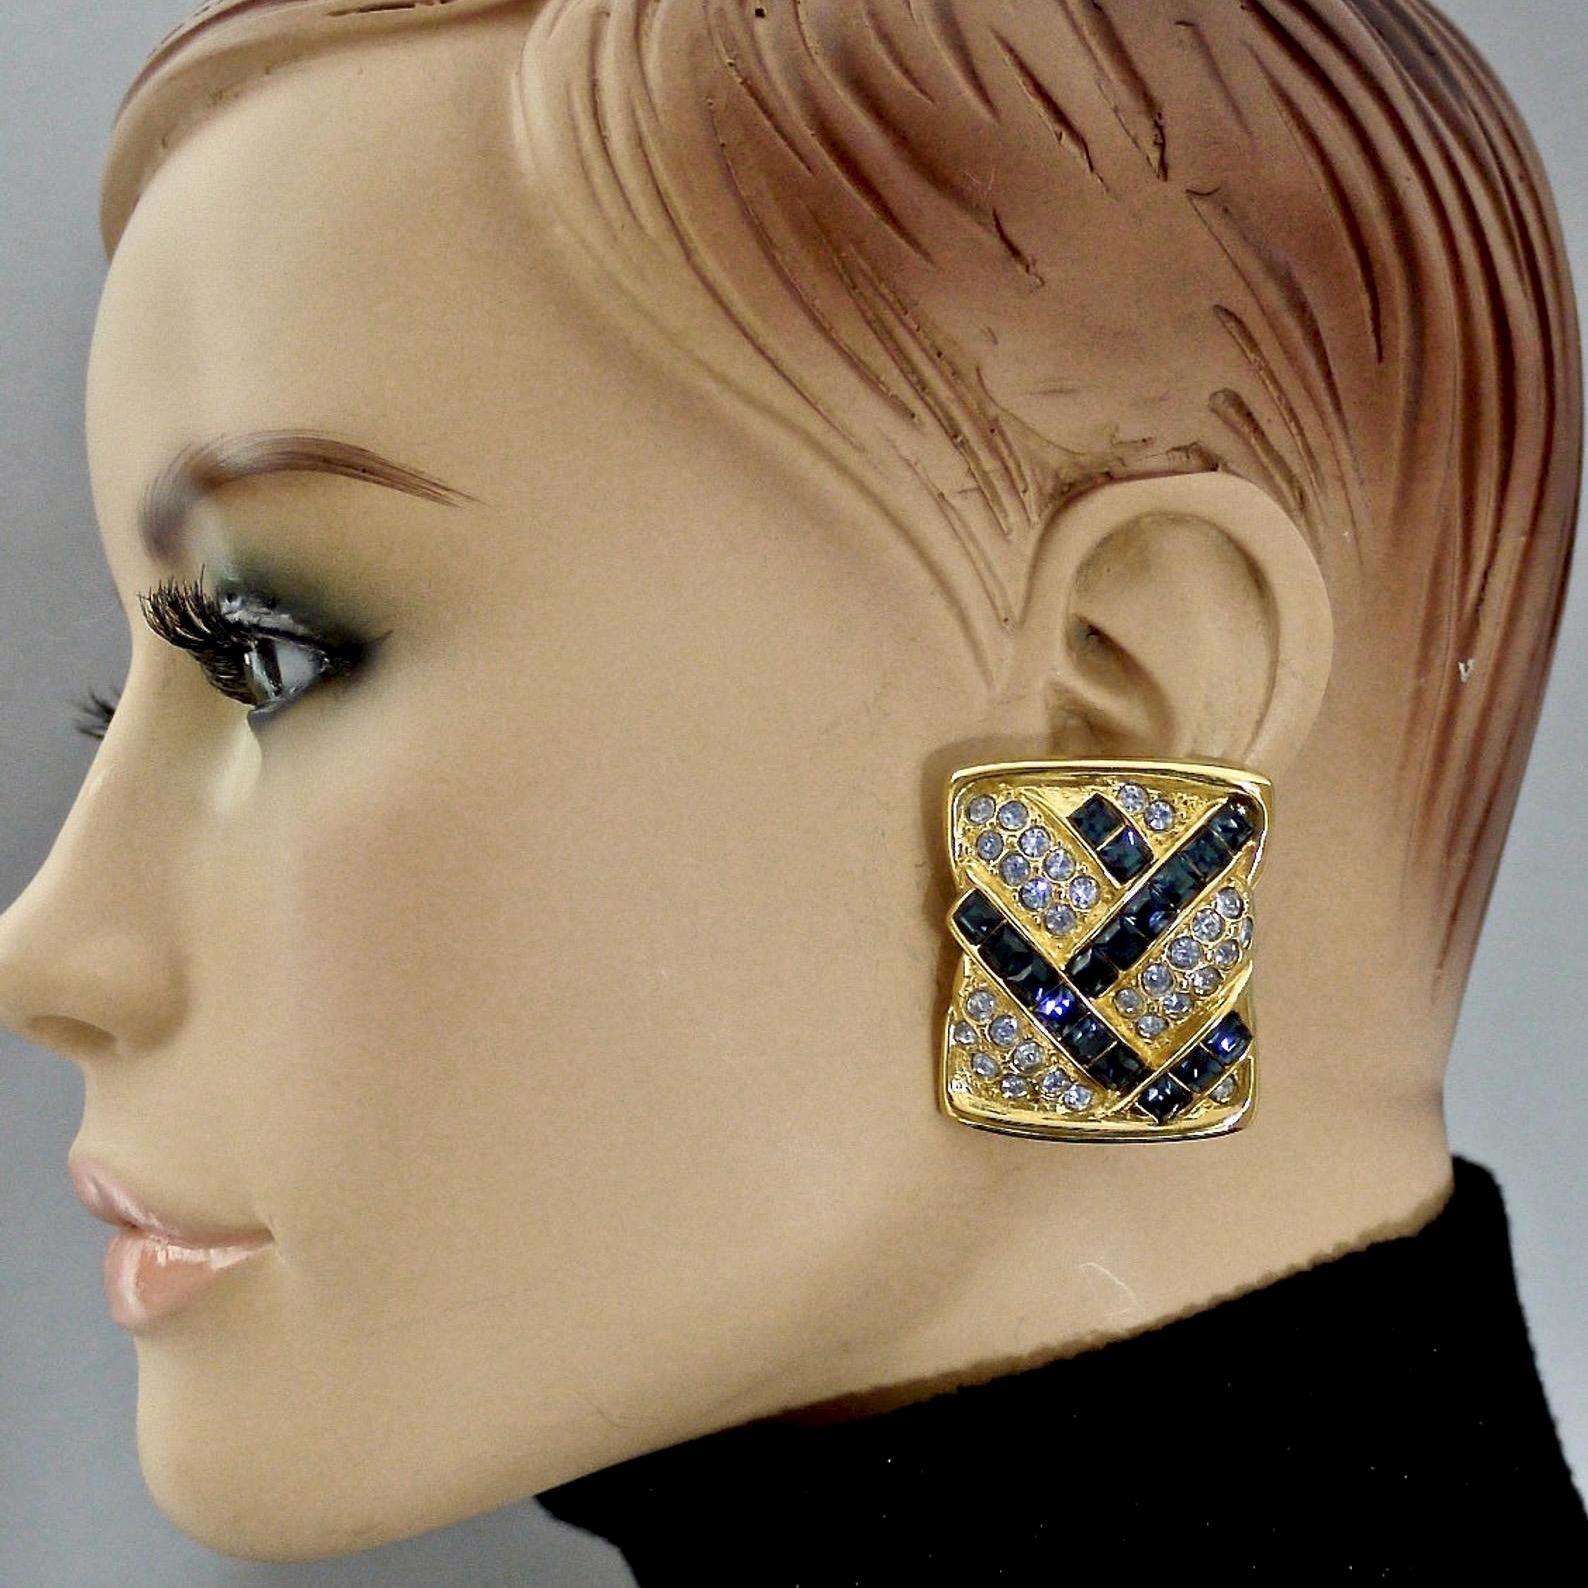 Vintage YVES SAINT LAURENT Ysl Abstract Rhinestone Rectangular Earrings

Measurements:
Height: 1.65 inches (4.2 cm)
Width: 1.33 inches (3.4 cm)
Weight per Earring: 28 grams

Features:
- 100% Authentic YVES SAINT LAURENT.
- Abstract rhinestones in